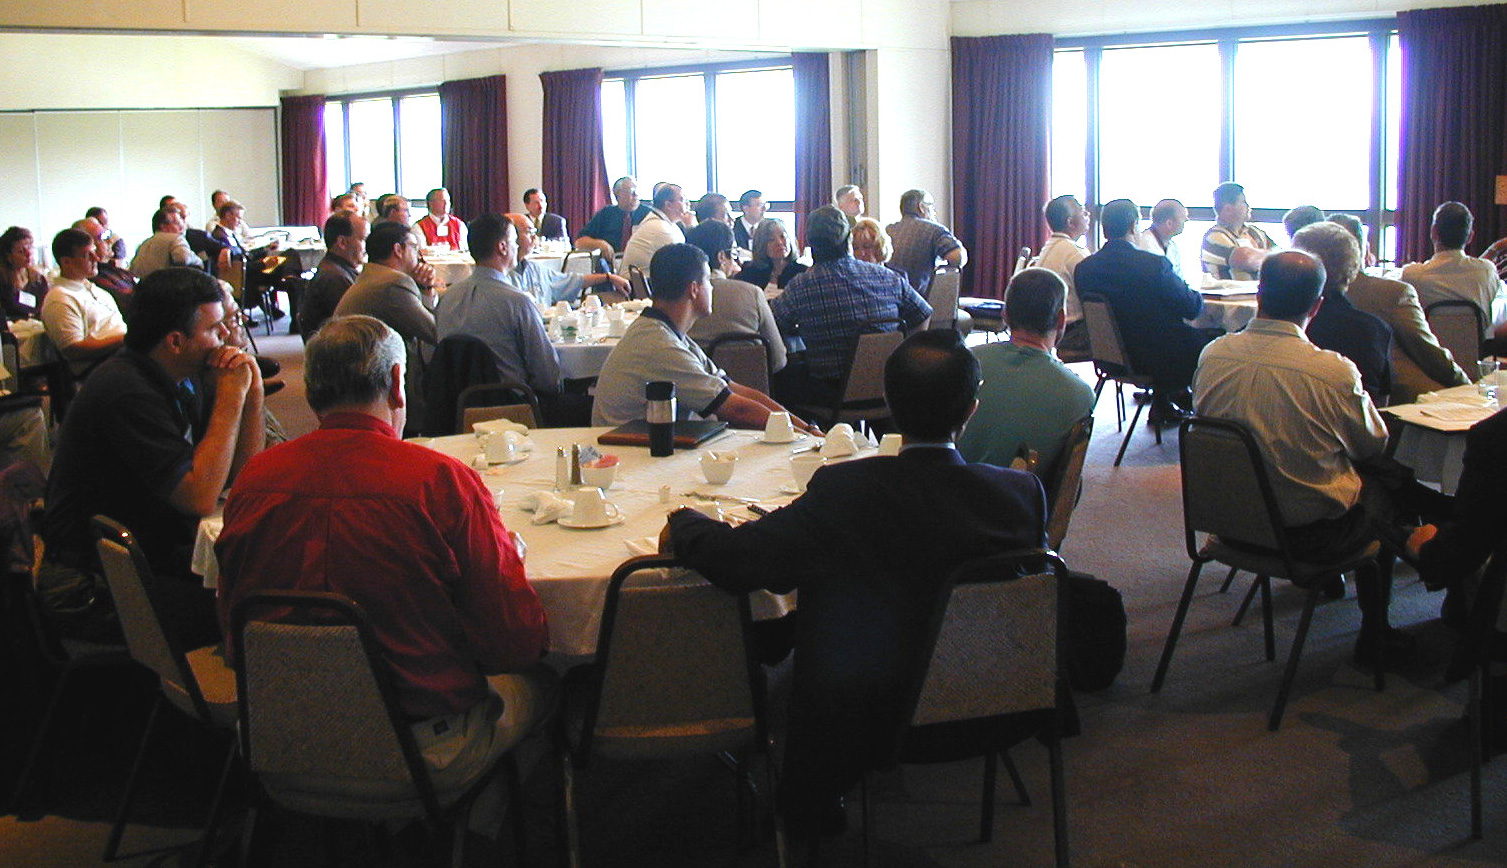 Nearly 70 state vendors attended the 2nd Annual Vendor Purchasing Conference